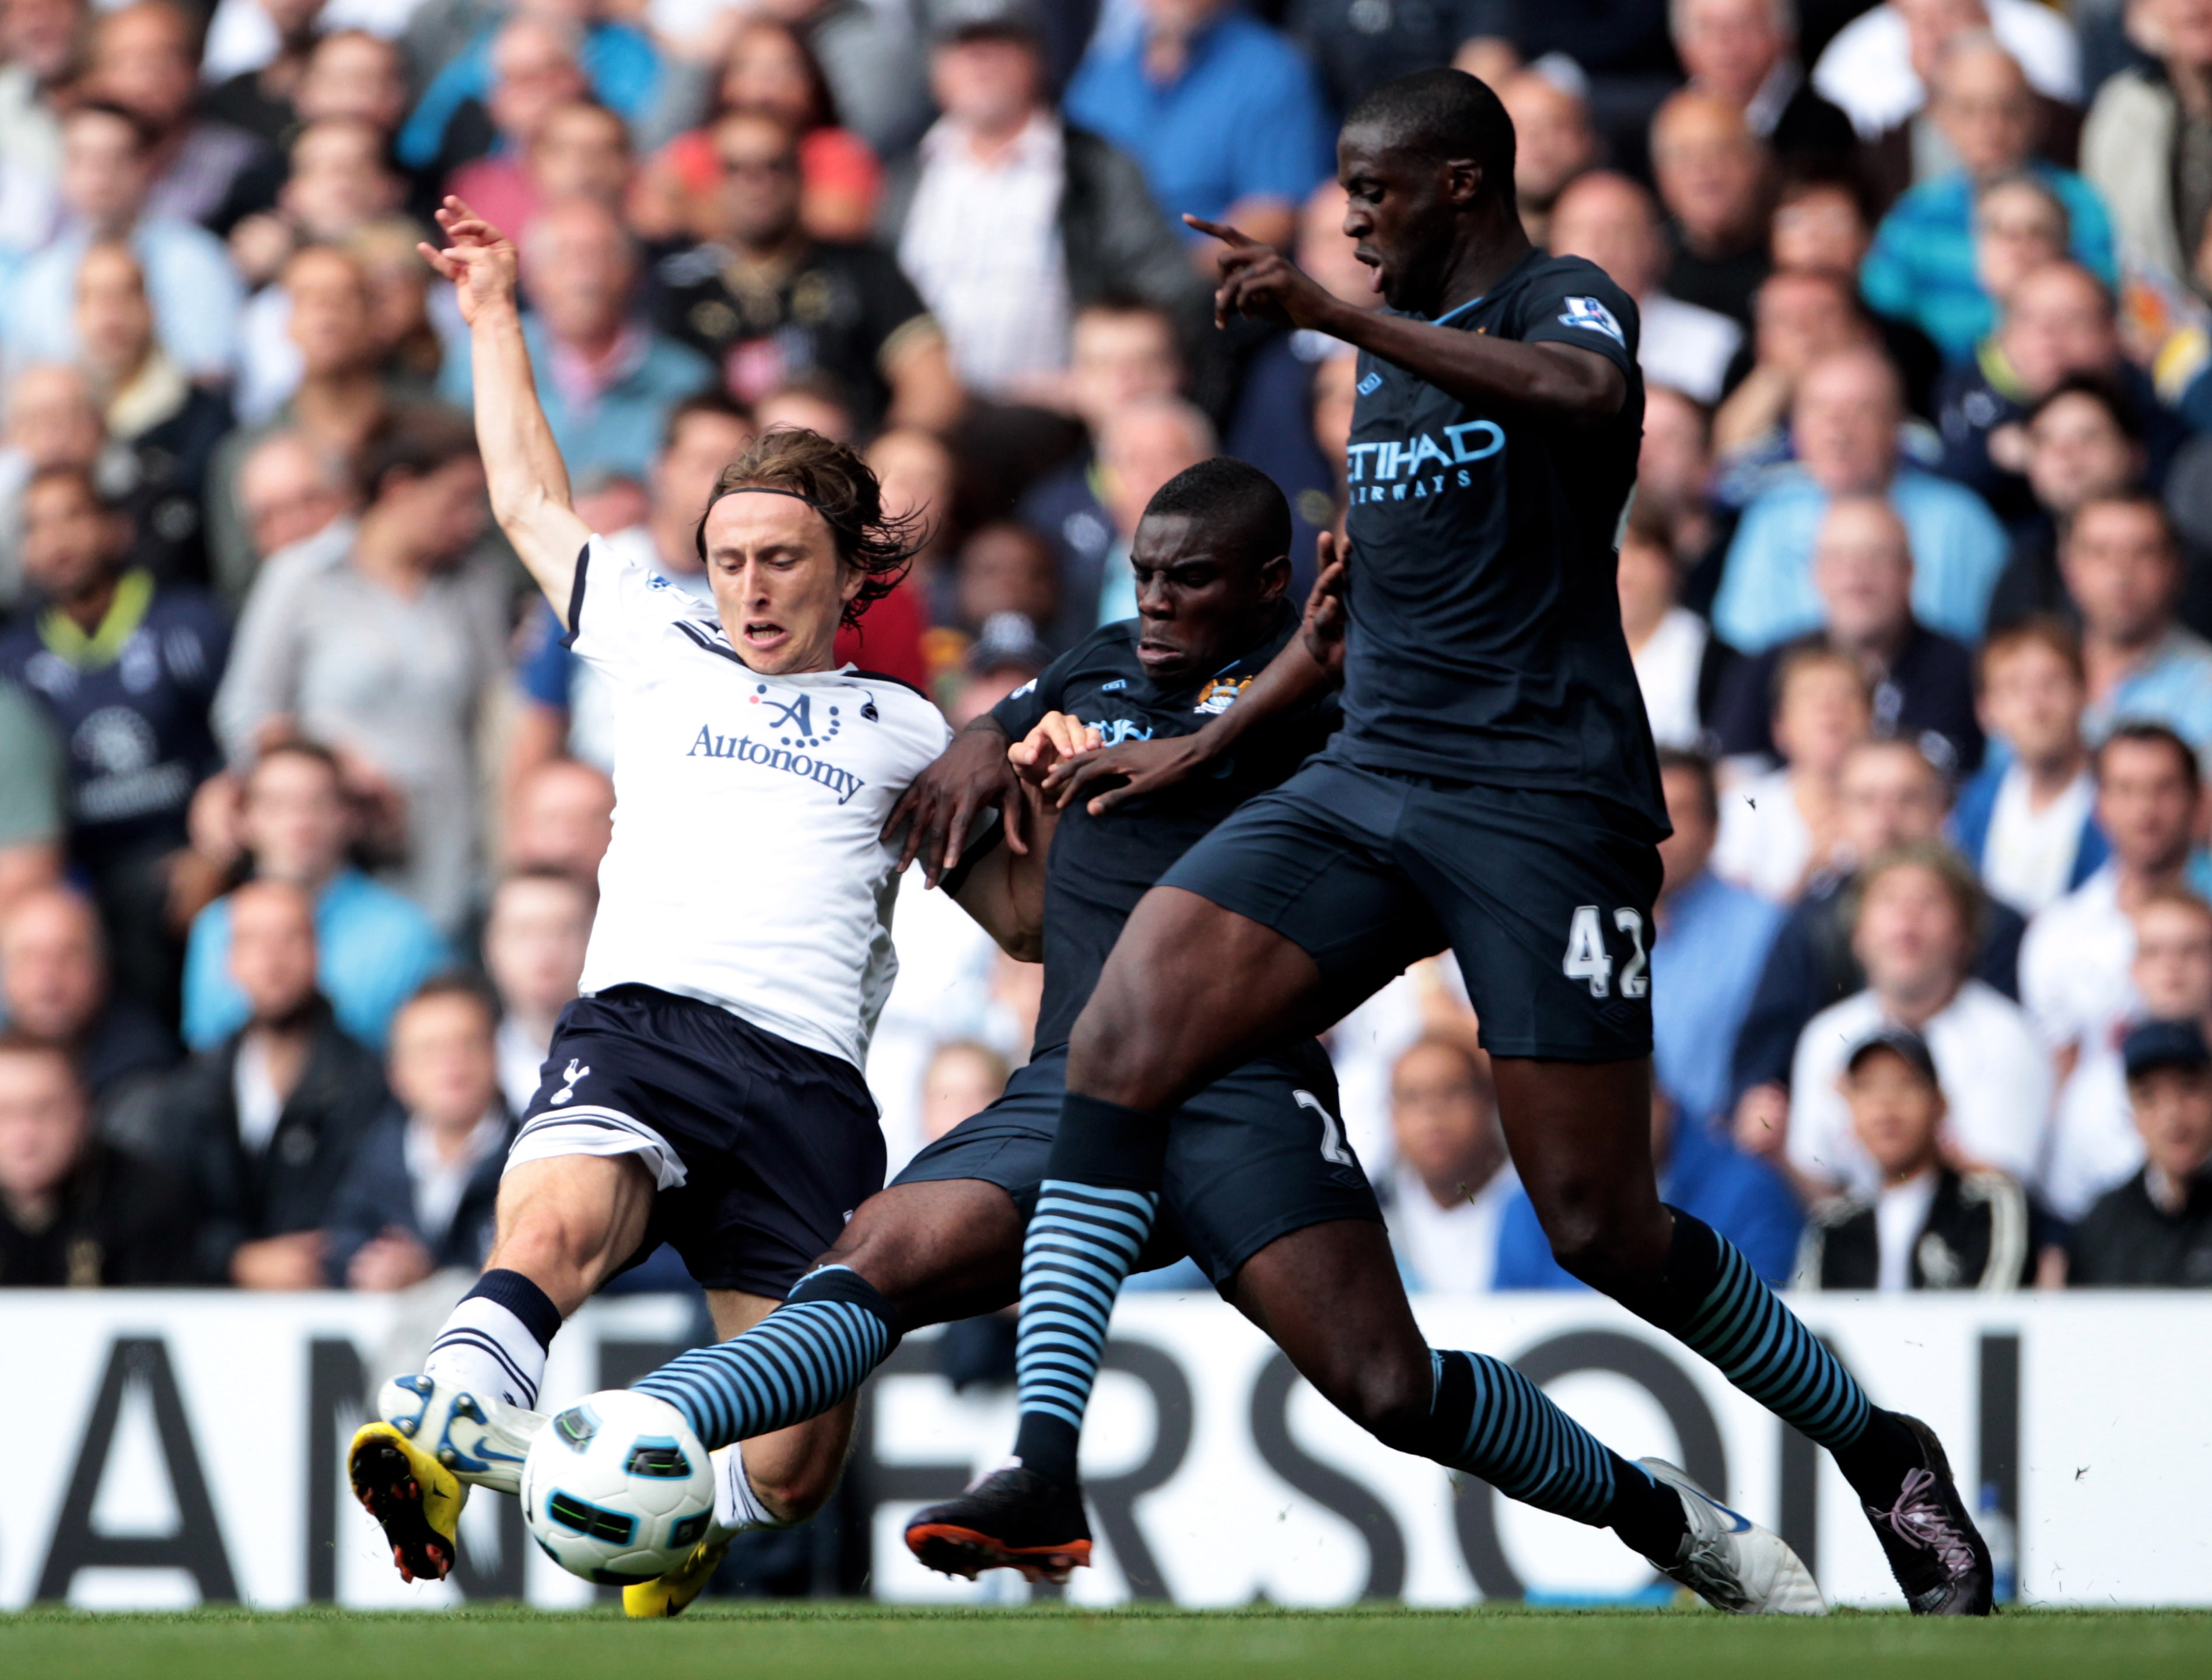 LONDON, ENGLAND - AUGUST 14:  Luka Modric of Tottenham battles with Micah Richards and Yaya Toure of Manchester City during the Barclays Premier League match between Tottenham Hotspur and Manchester City at White Hart Lane on August 14, 2010 in London, En